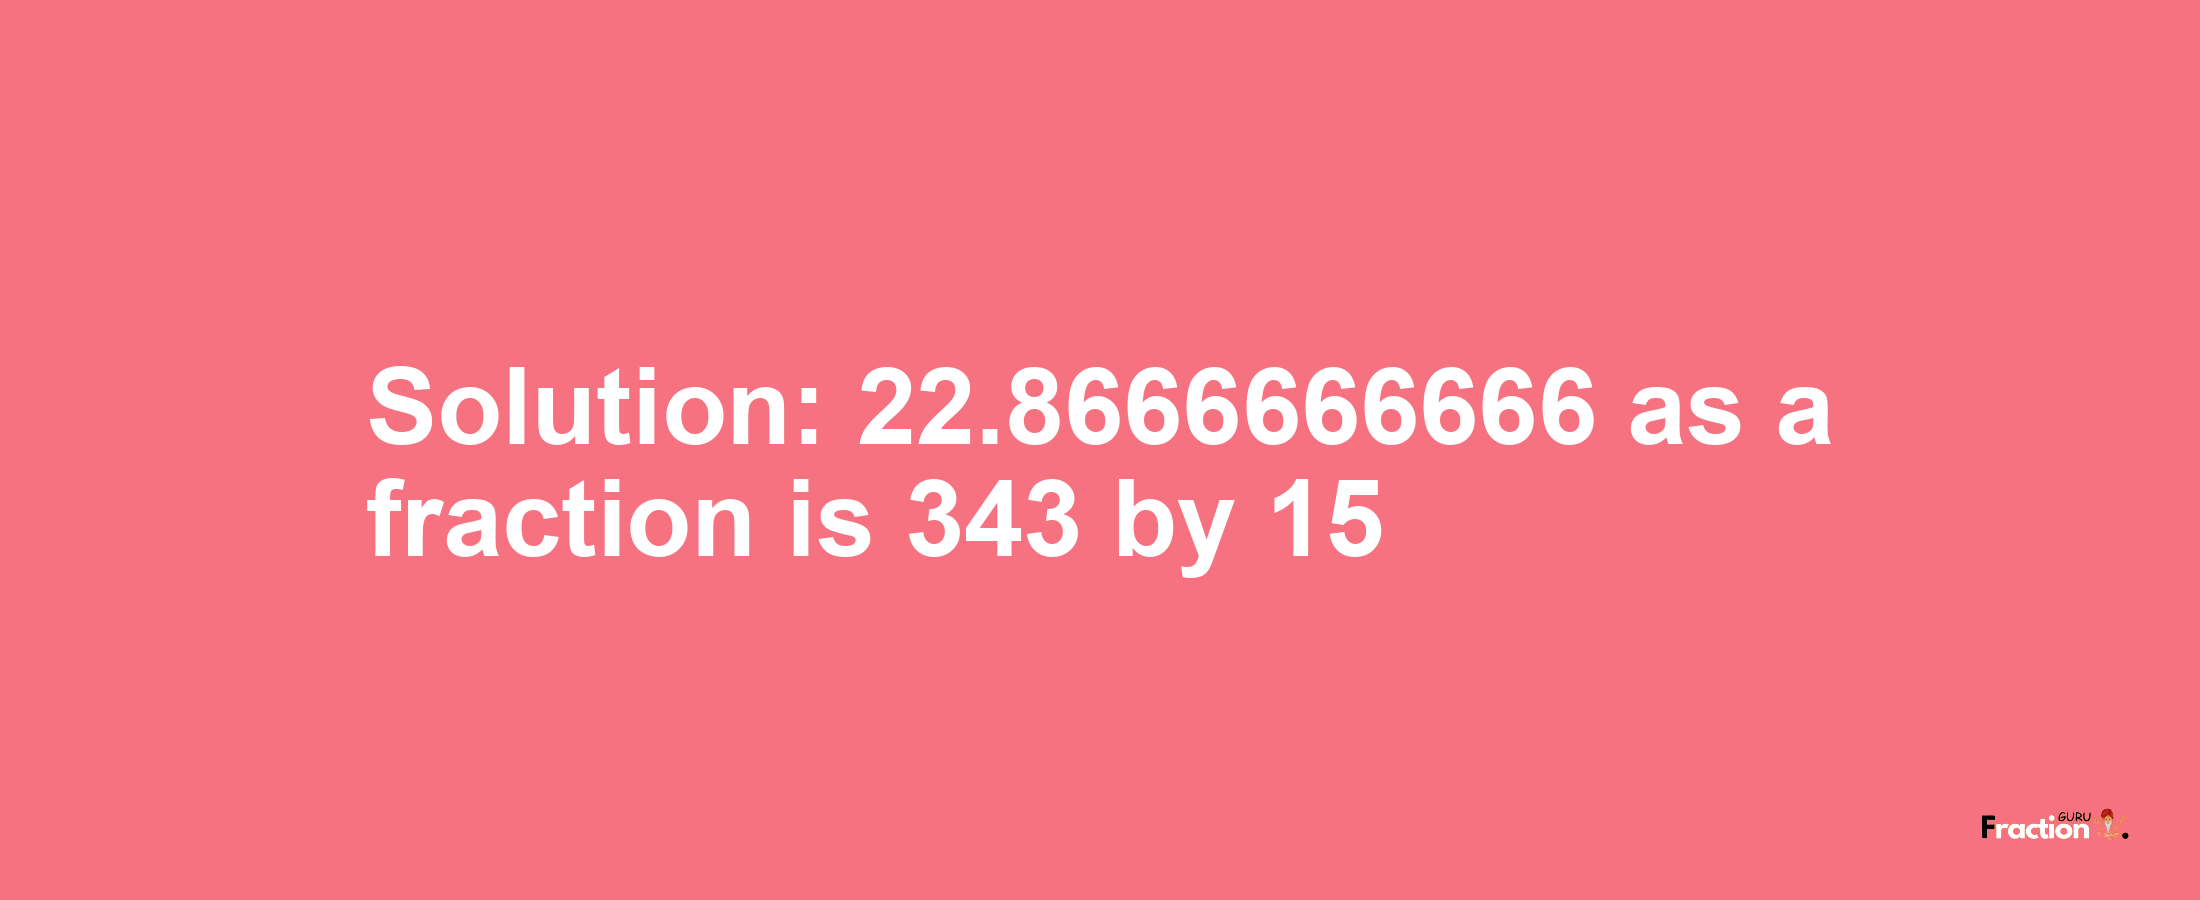 Solution:22.8666666666 as a fraction is 343/15